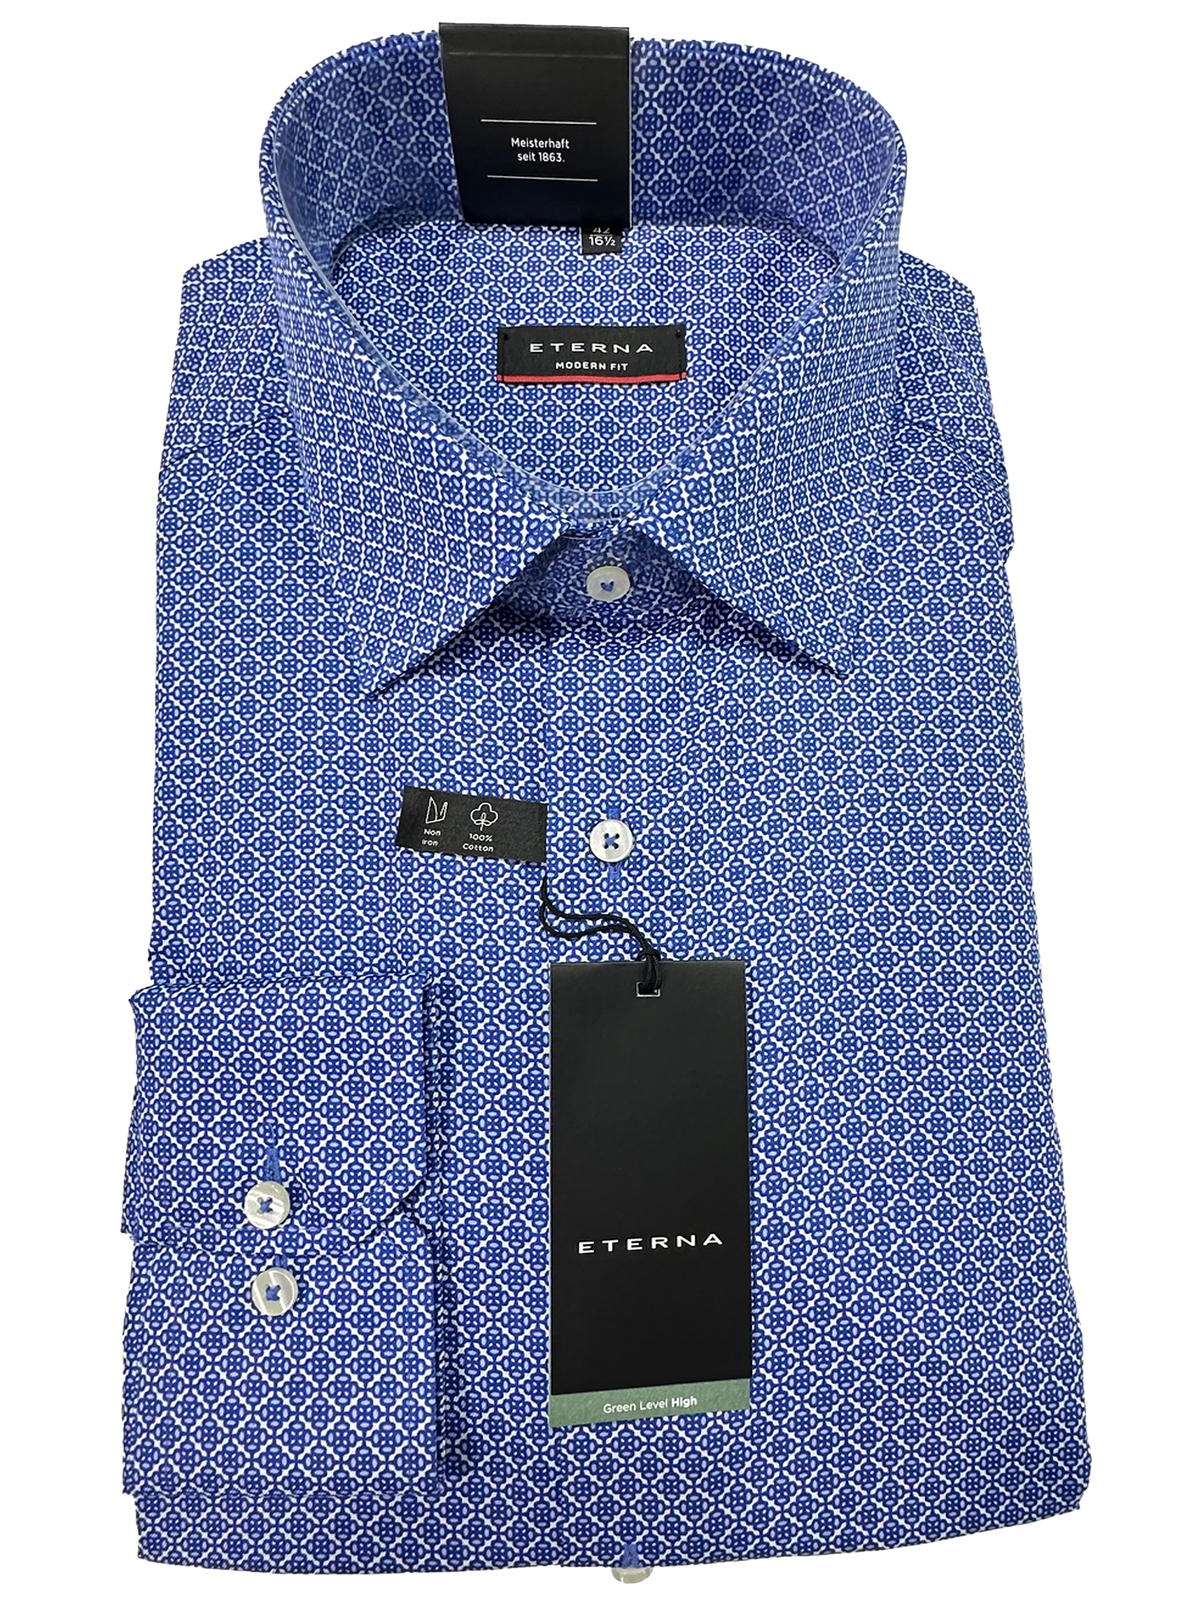 Page for Collection – 2 – Shirts Menswear Eterna Harrys